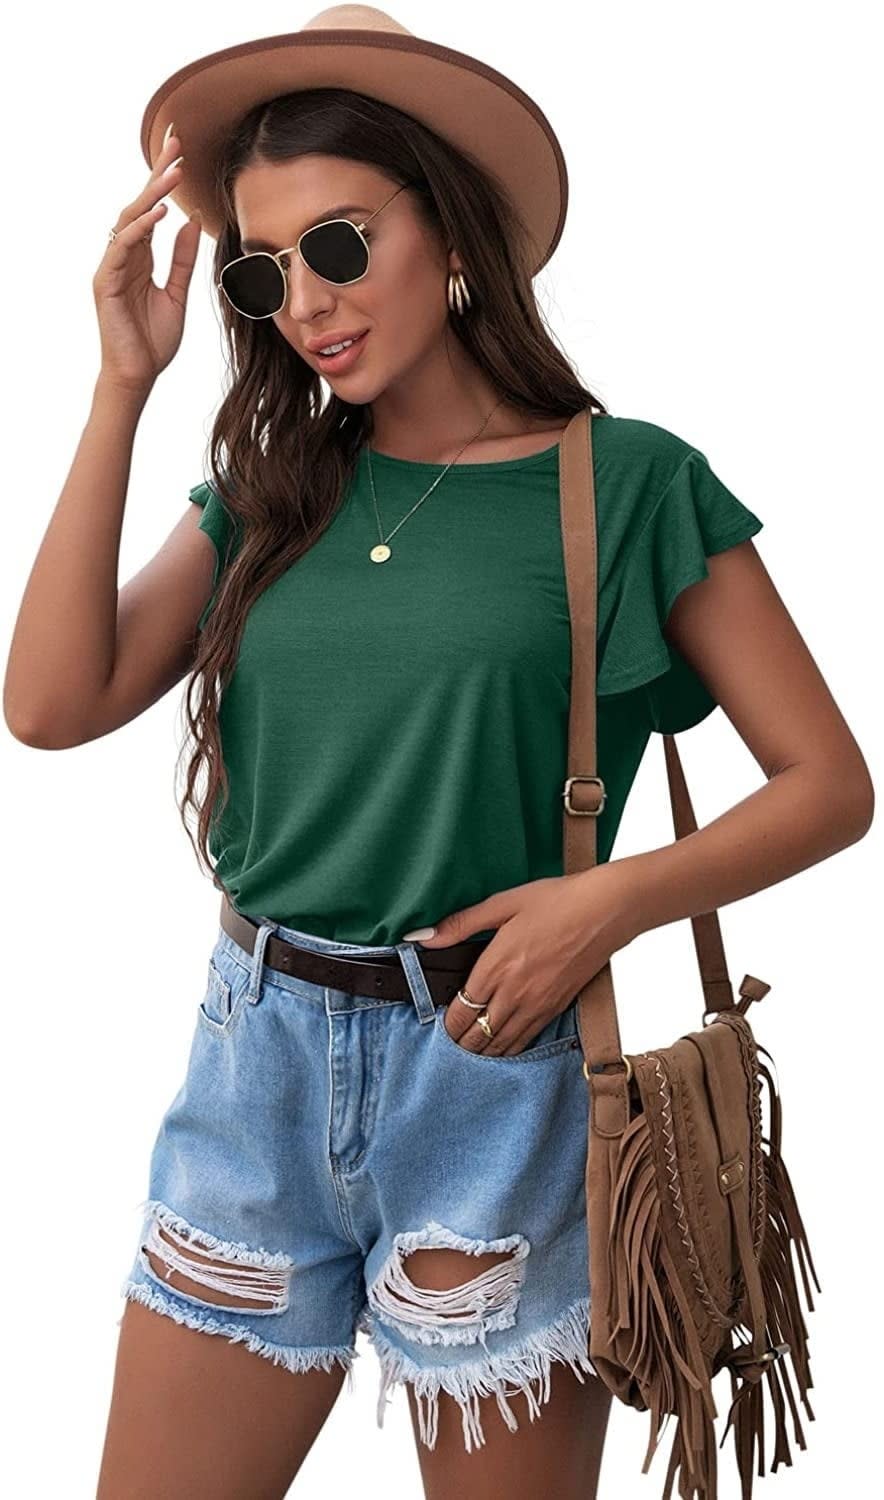 model posing with a hat, sunglasses, green top, denim shorts, and a fringed bag